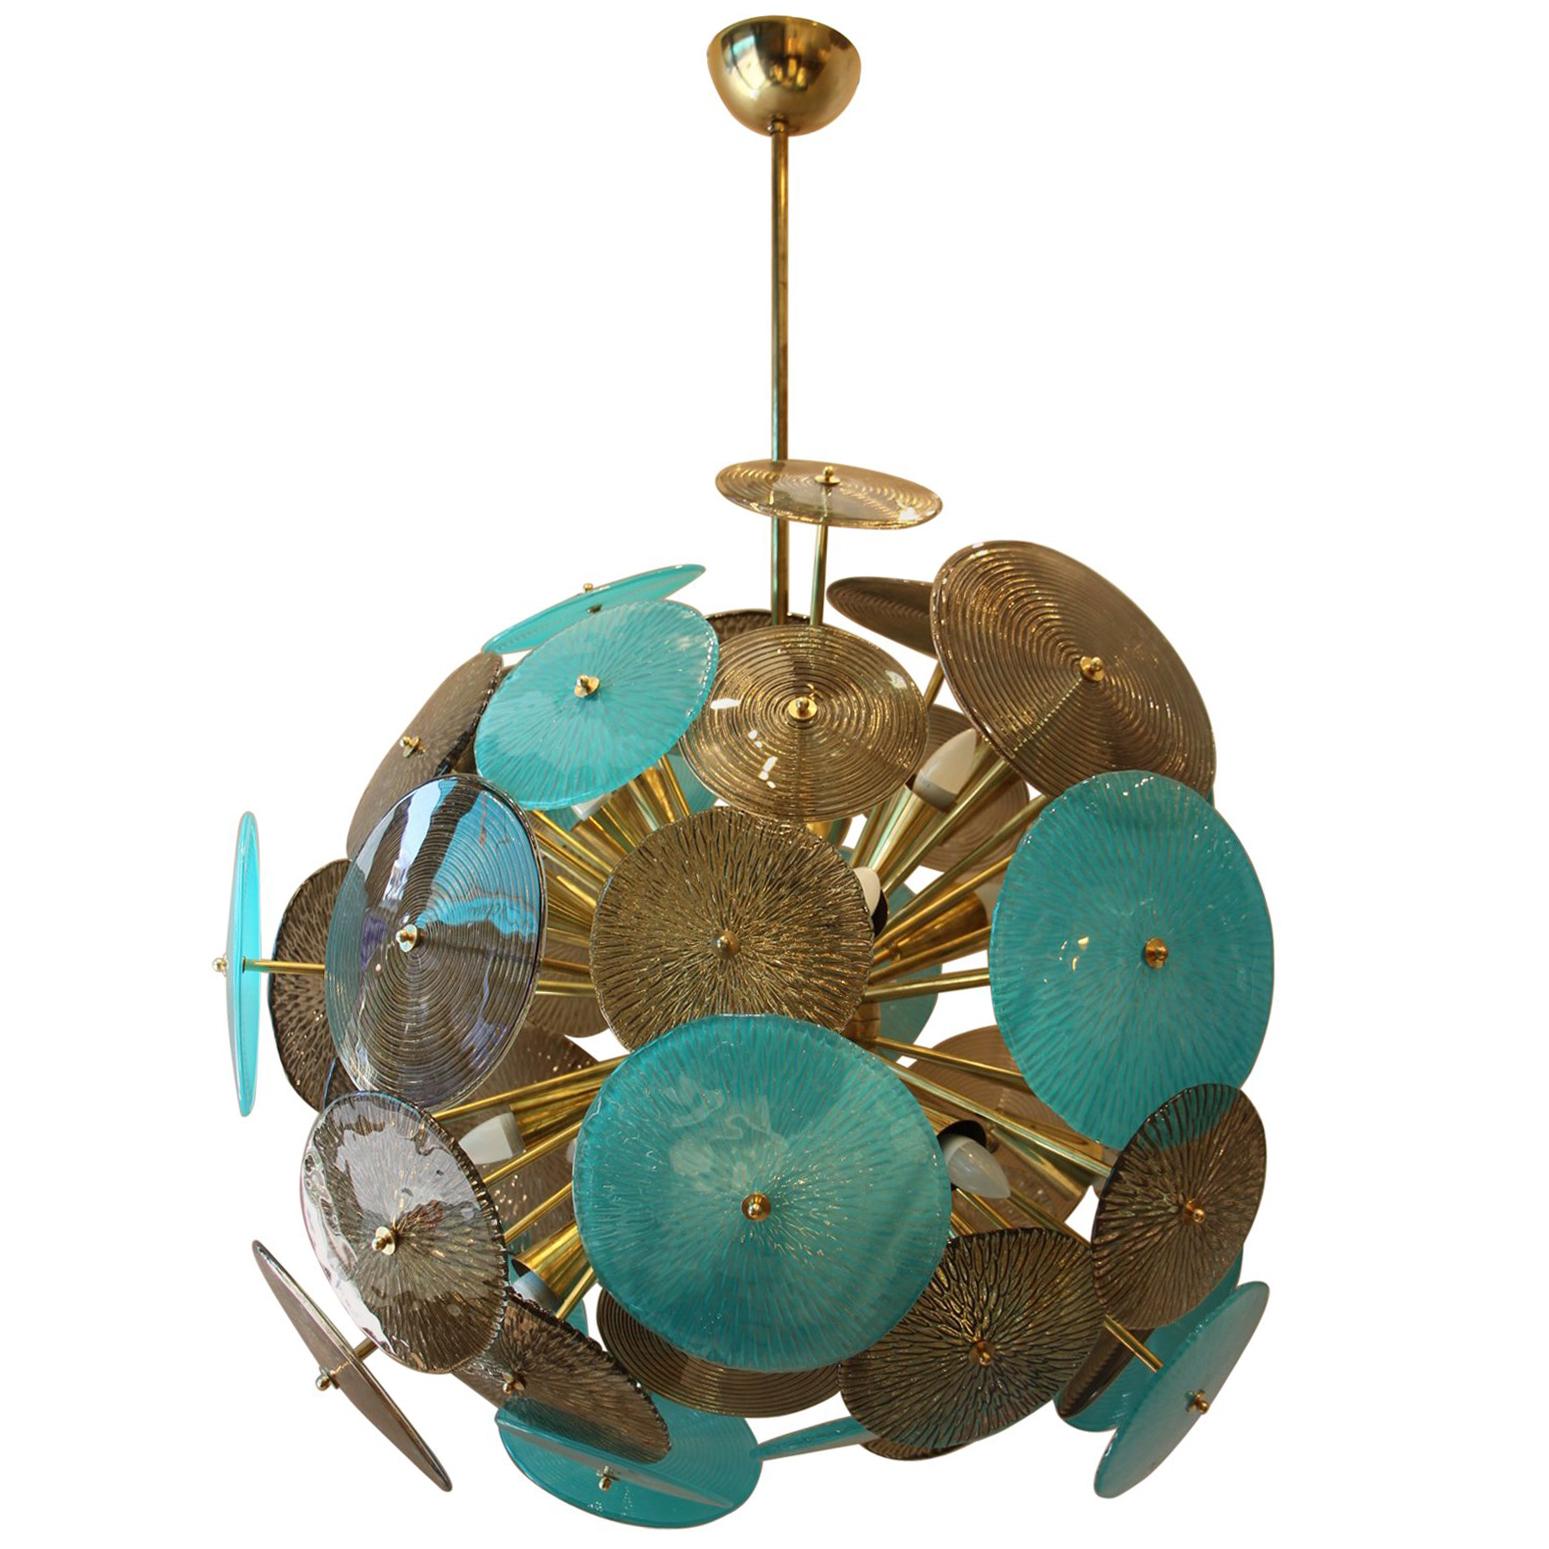 Turquoise and Gold Sputnik Chandelier with Murano Glass Disks